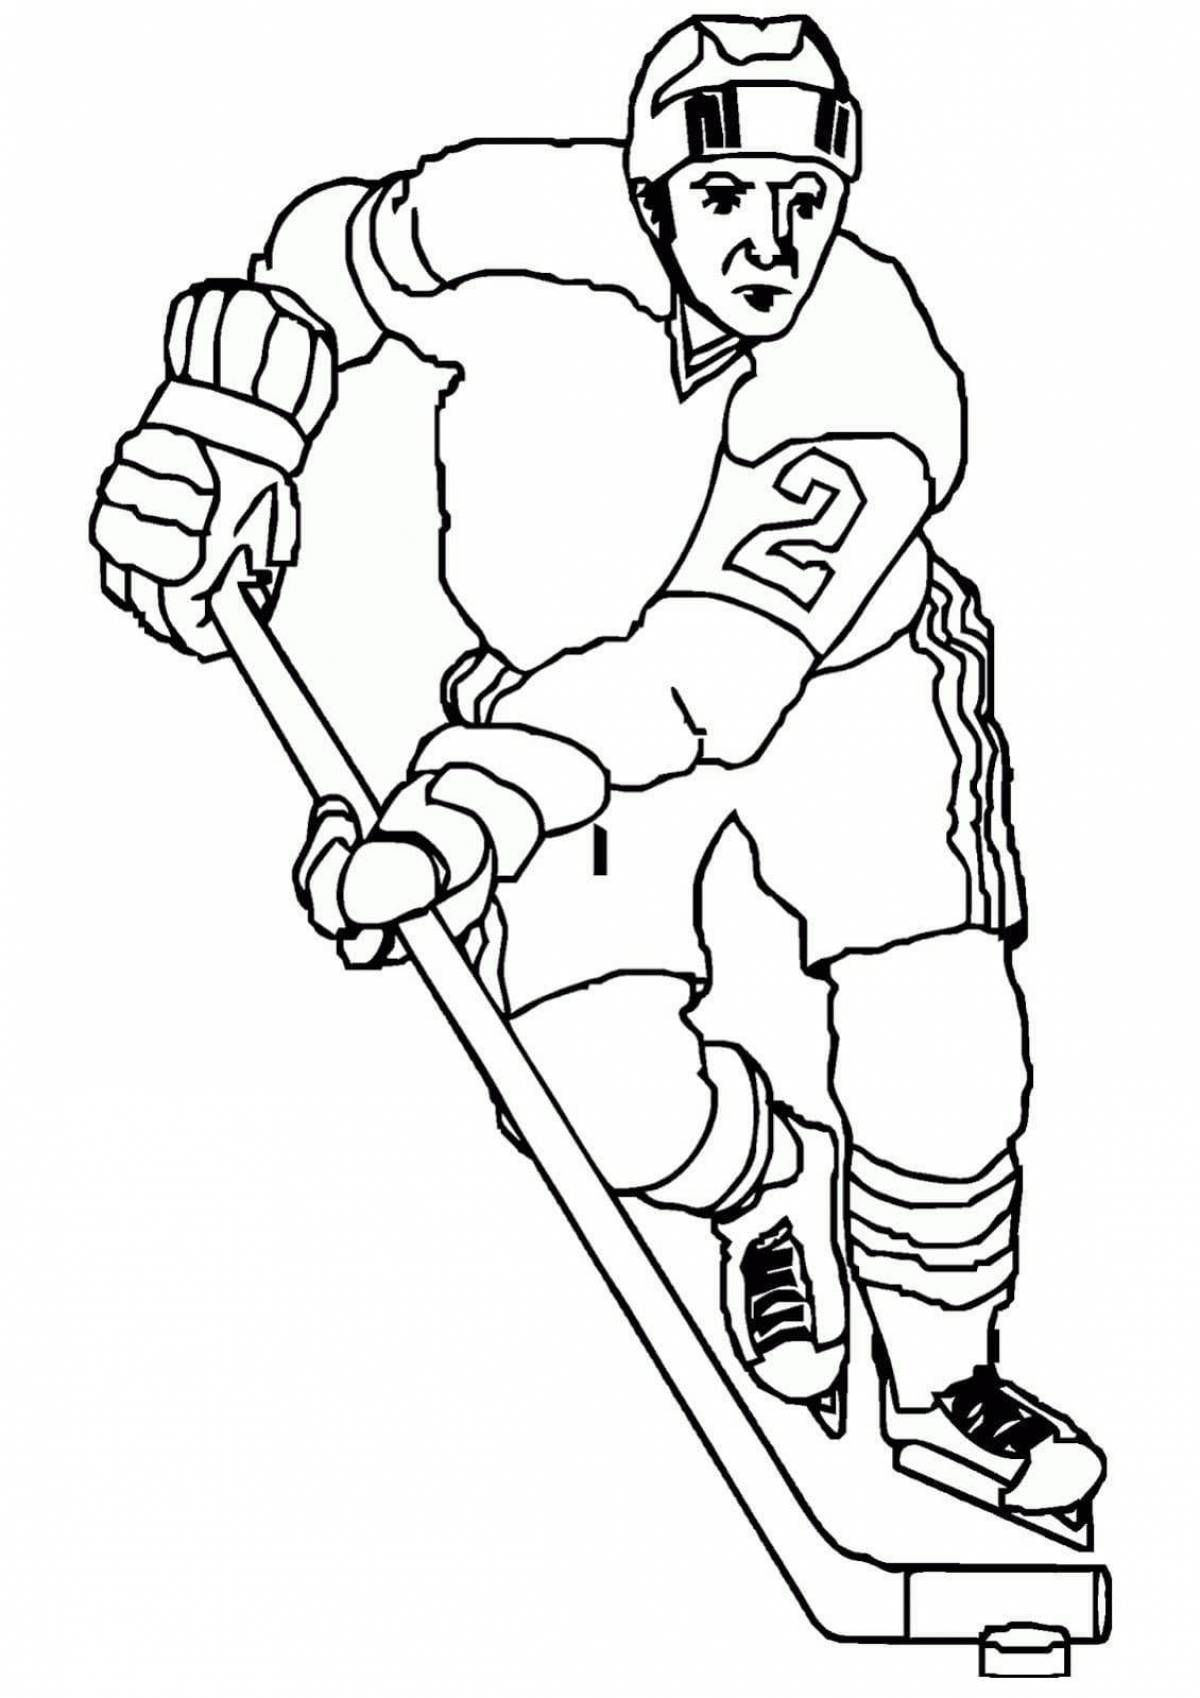 Incredible hockey player coloring book for kids